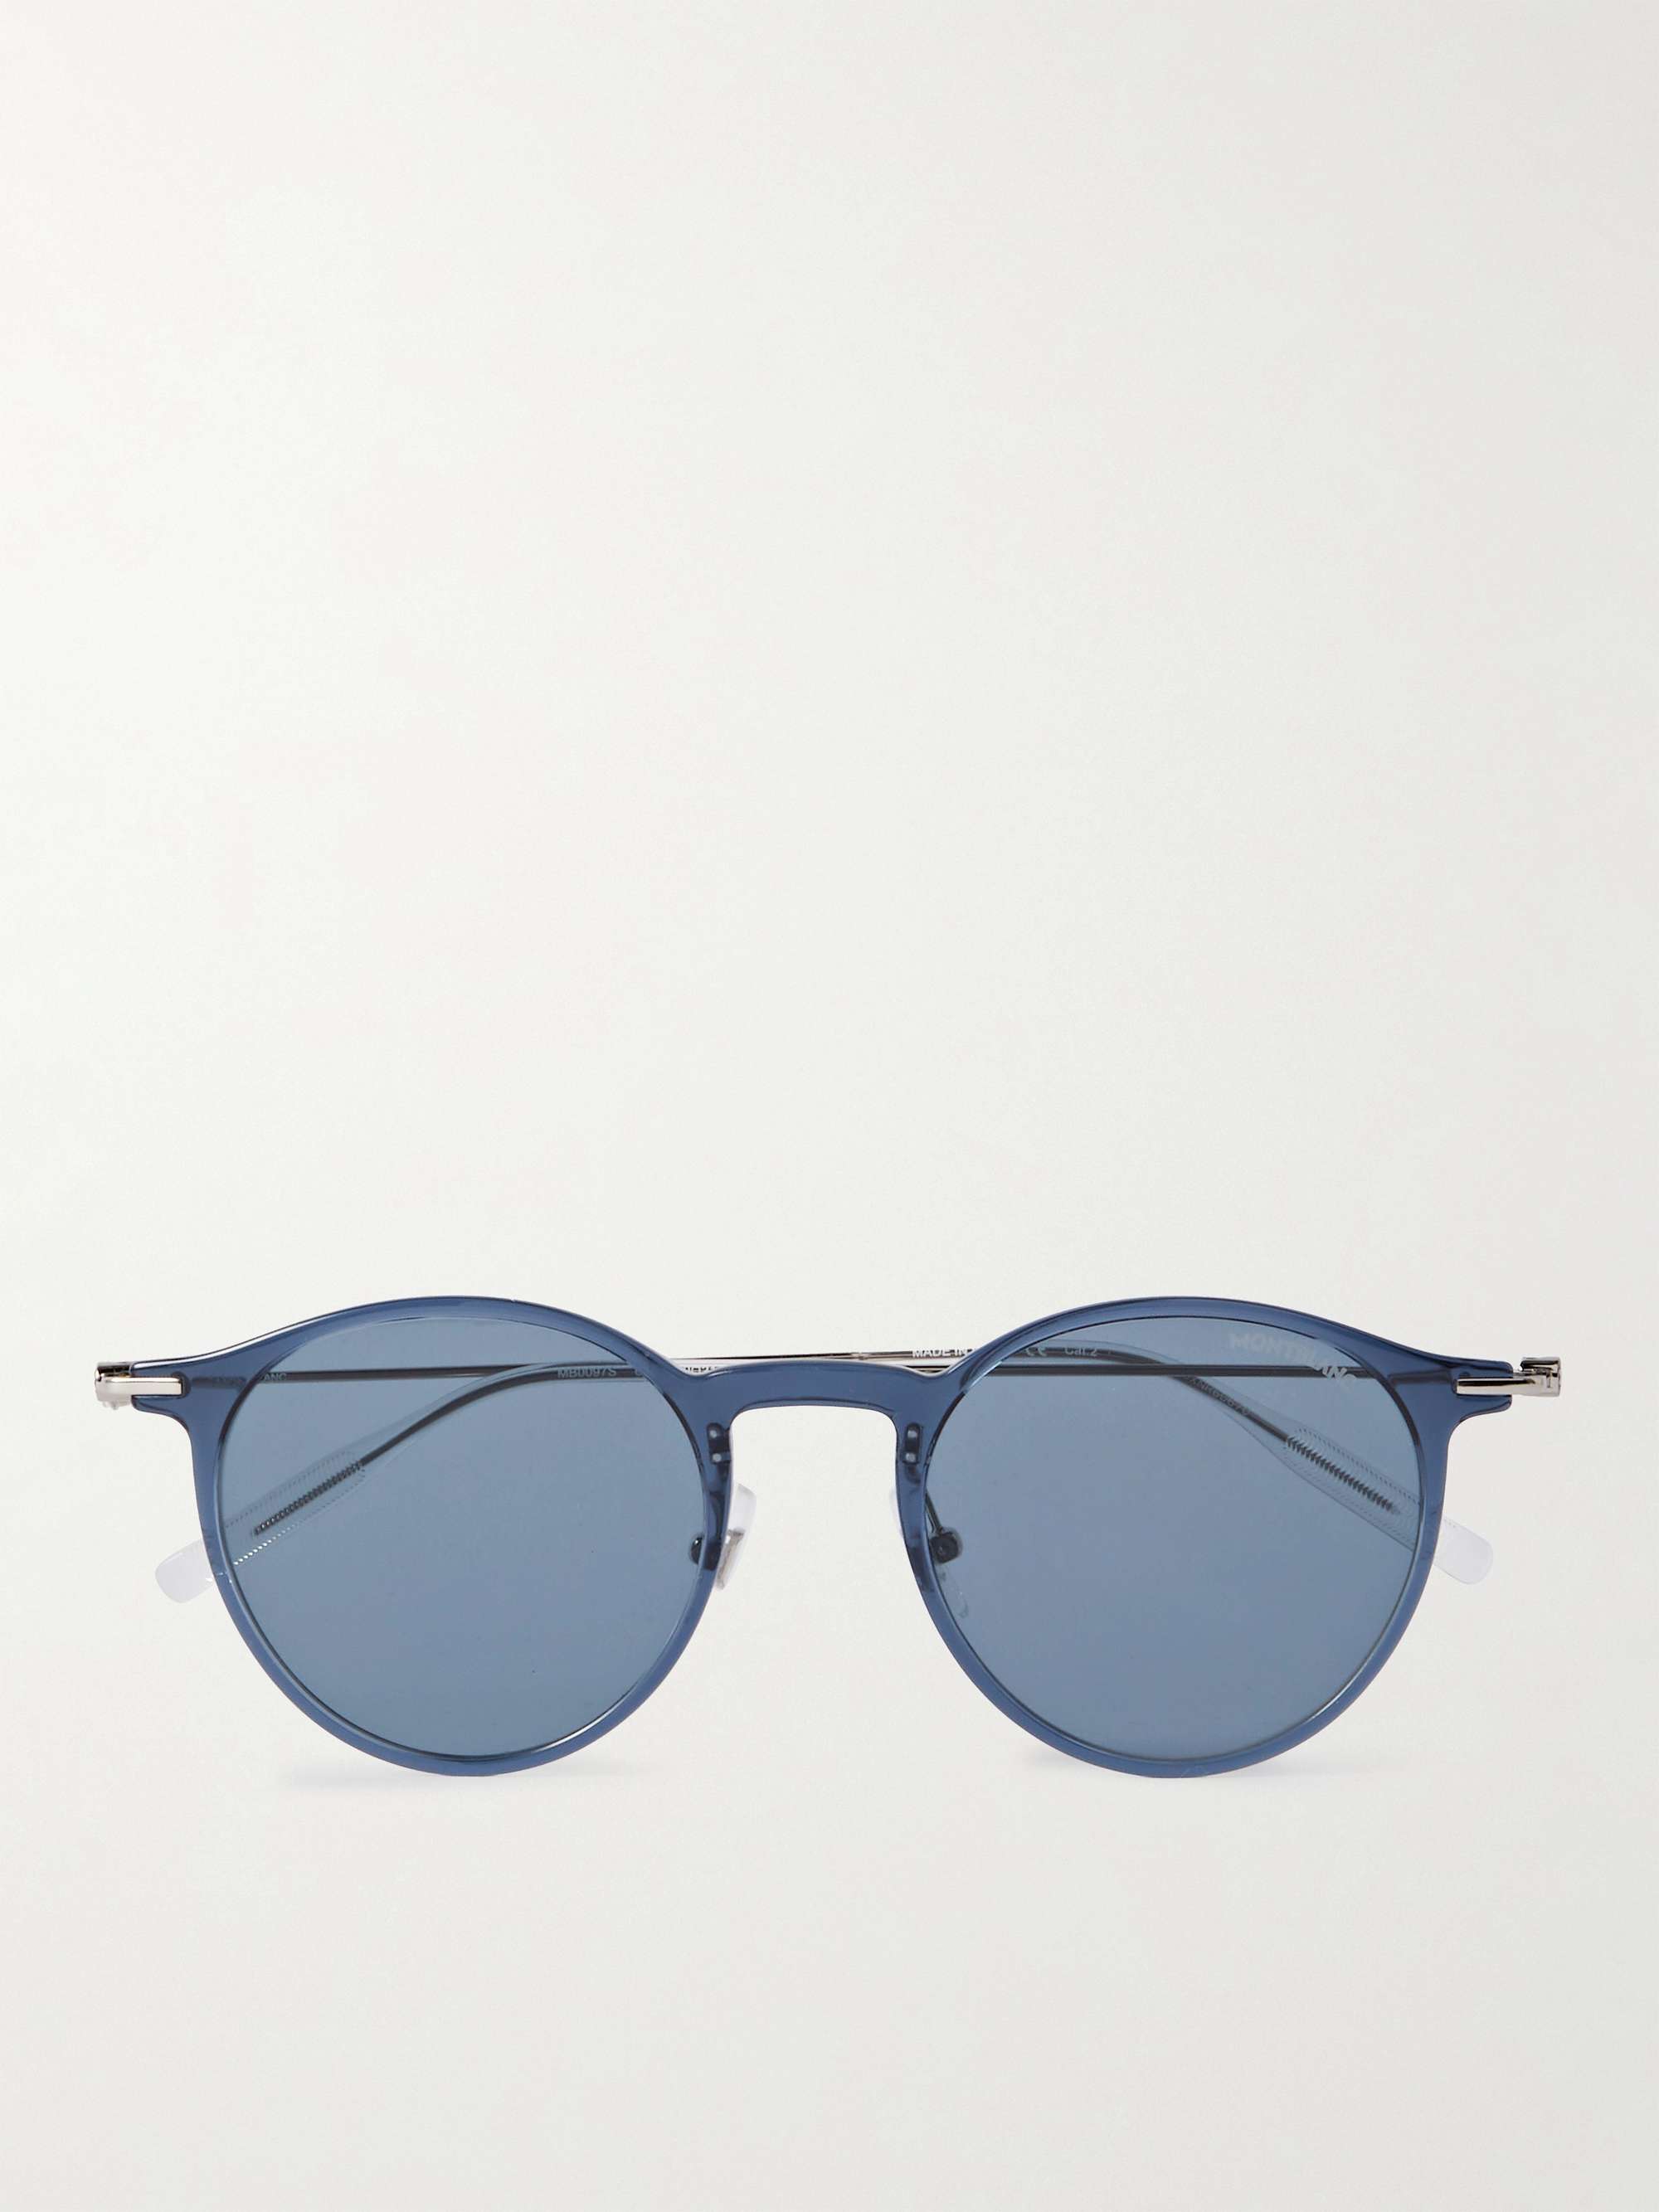 MONTBLANC Round-Frame Acetate and Silver-Tone Sunglasses